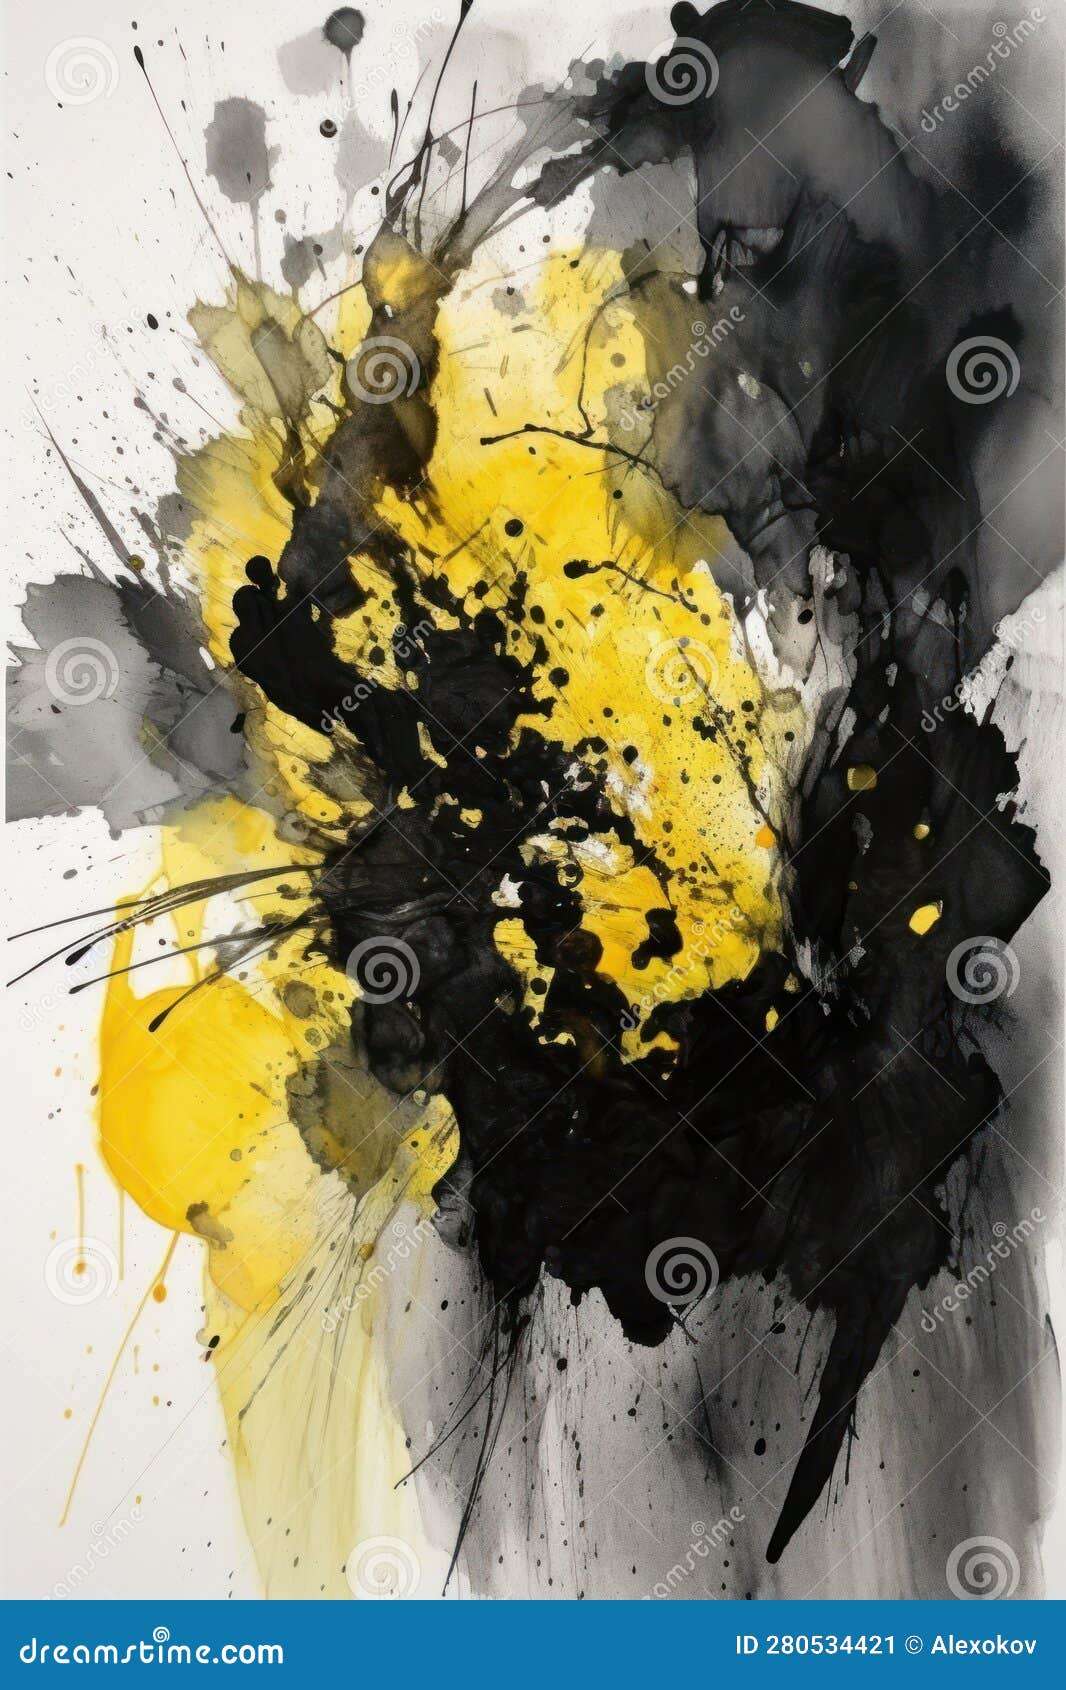 Minimalistic Black and Yellow Abstract Watercolor Painting . Stock ...